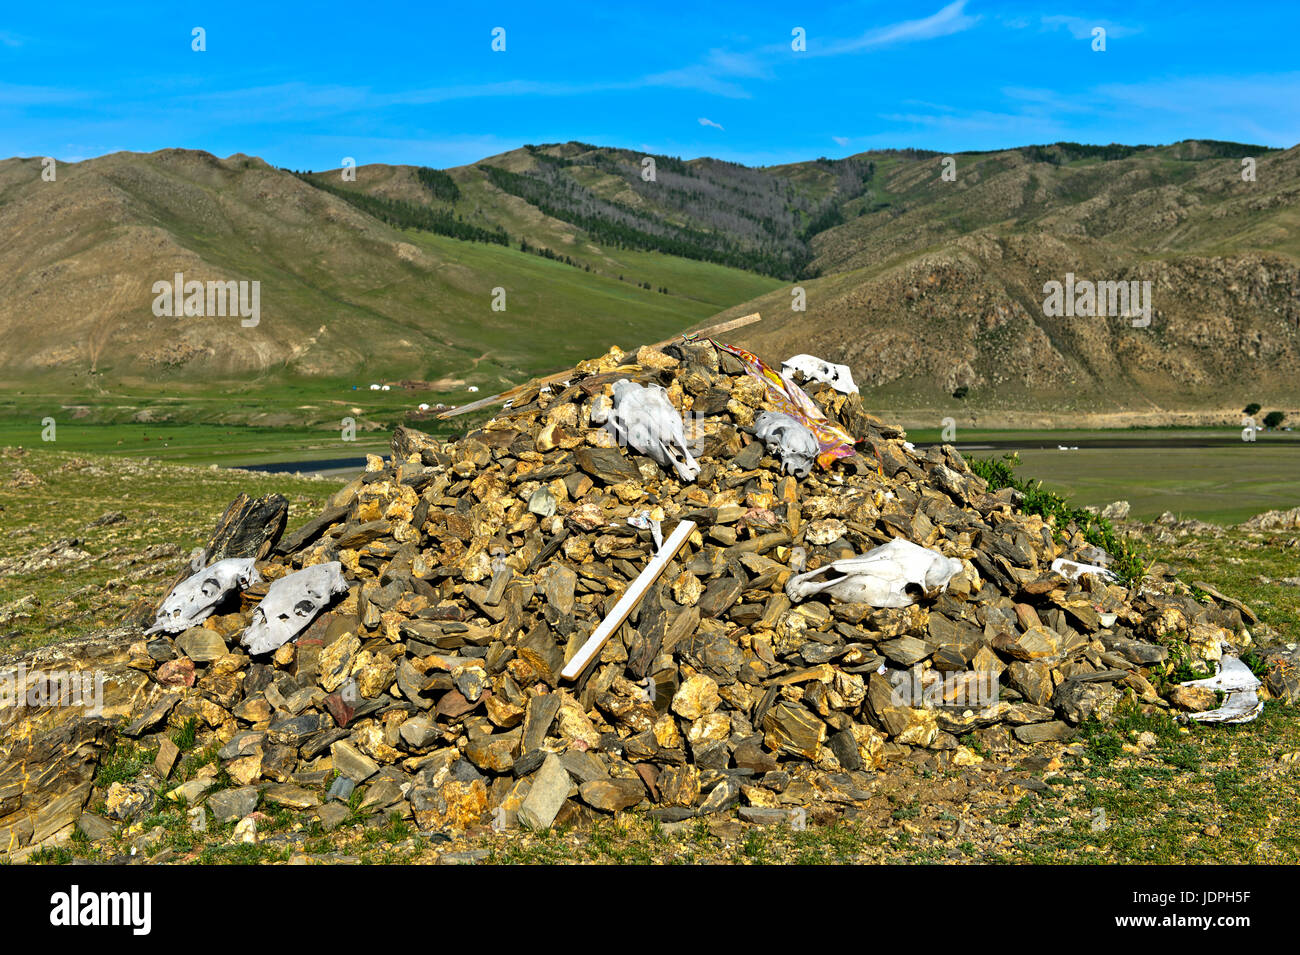 Ovoo, sacred place and prayer place, chambered cairn with animal skulls, Orchon Valley, Mongolia Stock Photo